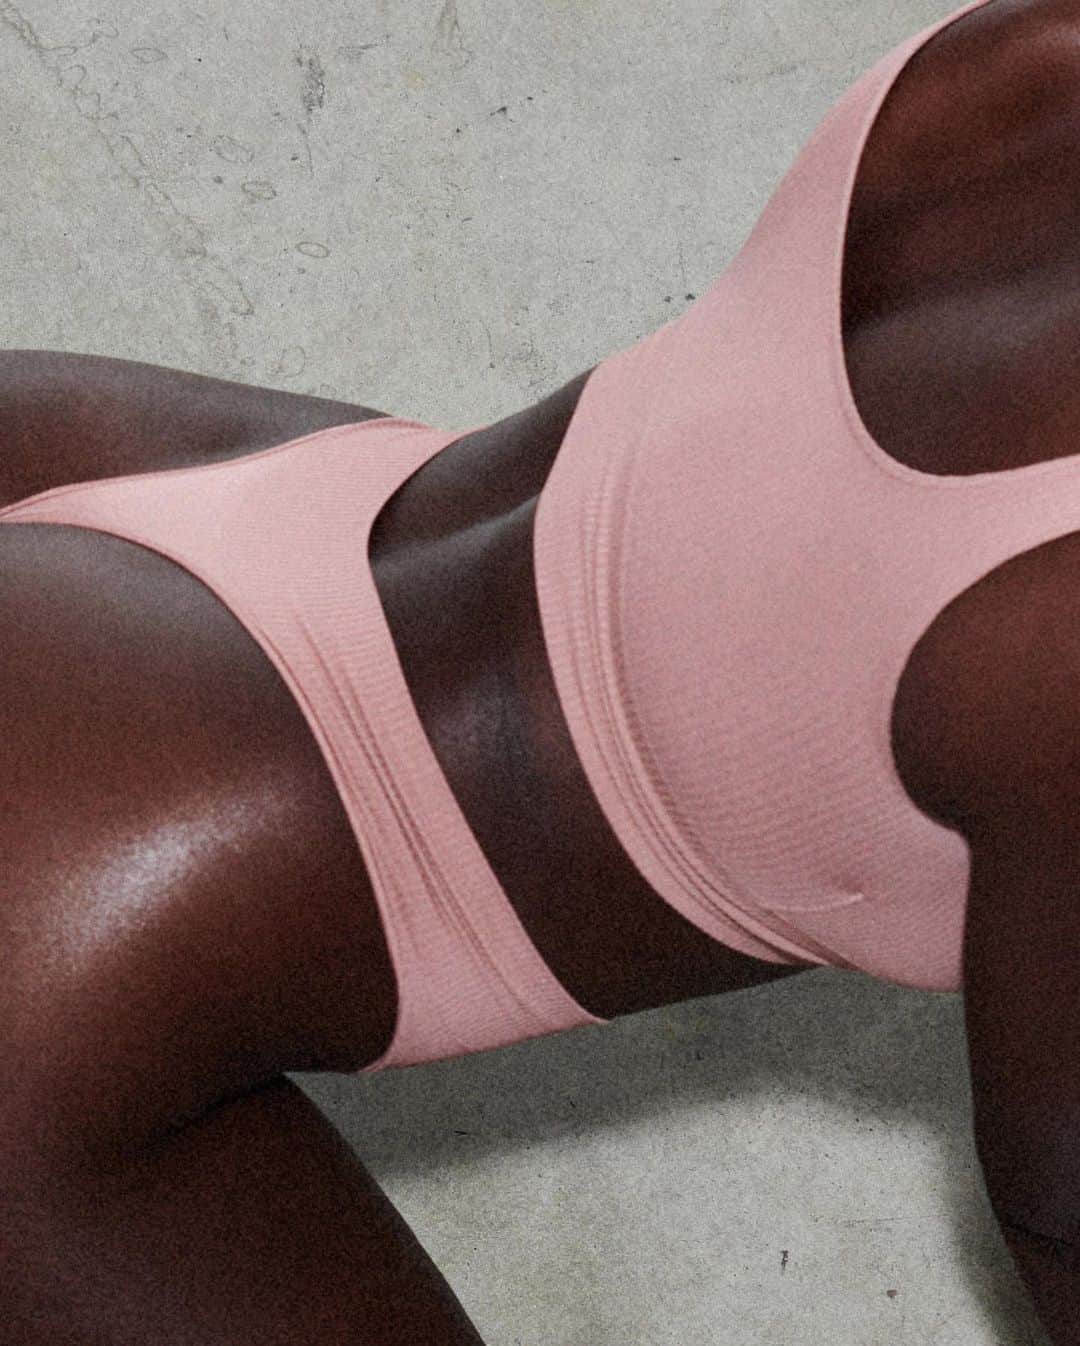 SKIMS BODY — launching in 4 colors and in sizes XXS - 4X tomorrow